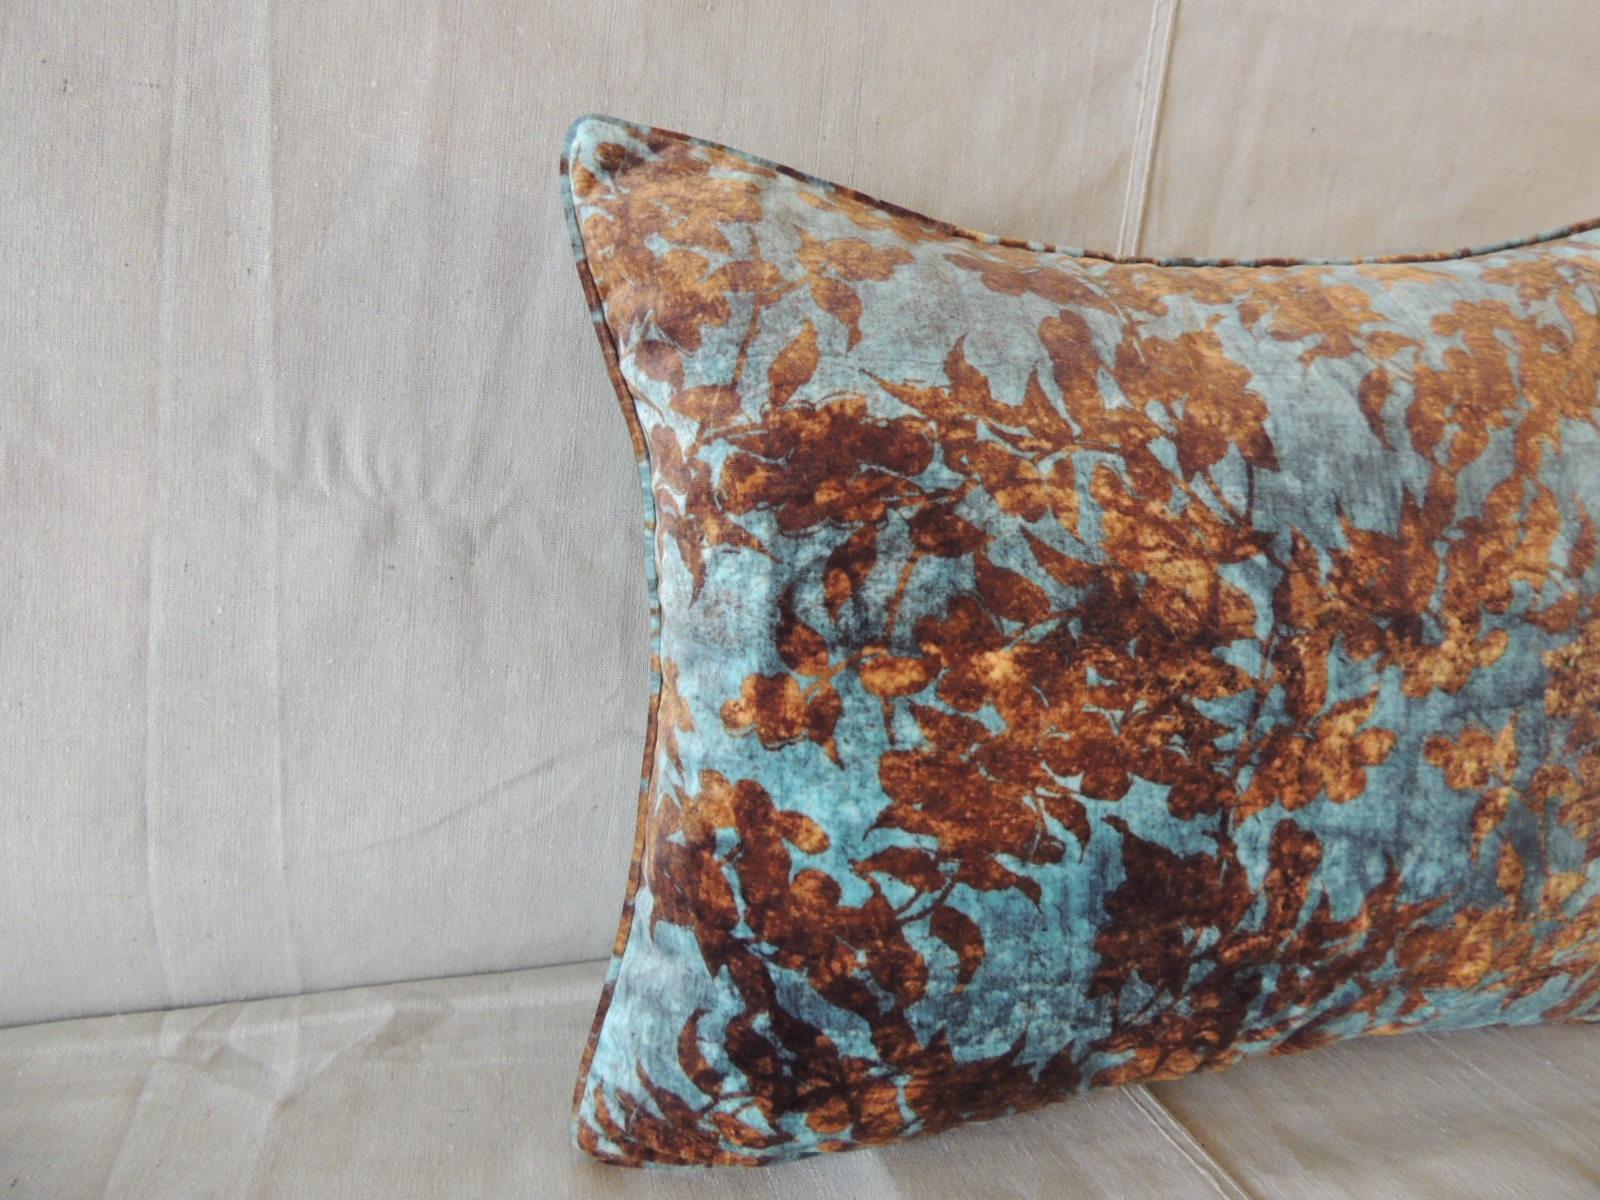 Burnt orange and aqua velvet modern bolster decorative pillow.
Solid brown velvet backing and self welt.
Decorative pillow handcrafted in Portugal.
Zipper closure with custom-made pillow insert.
Size: 15